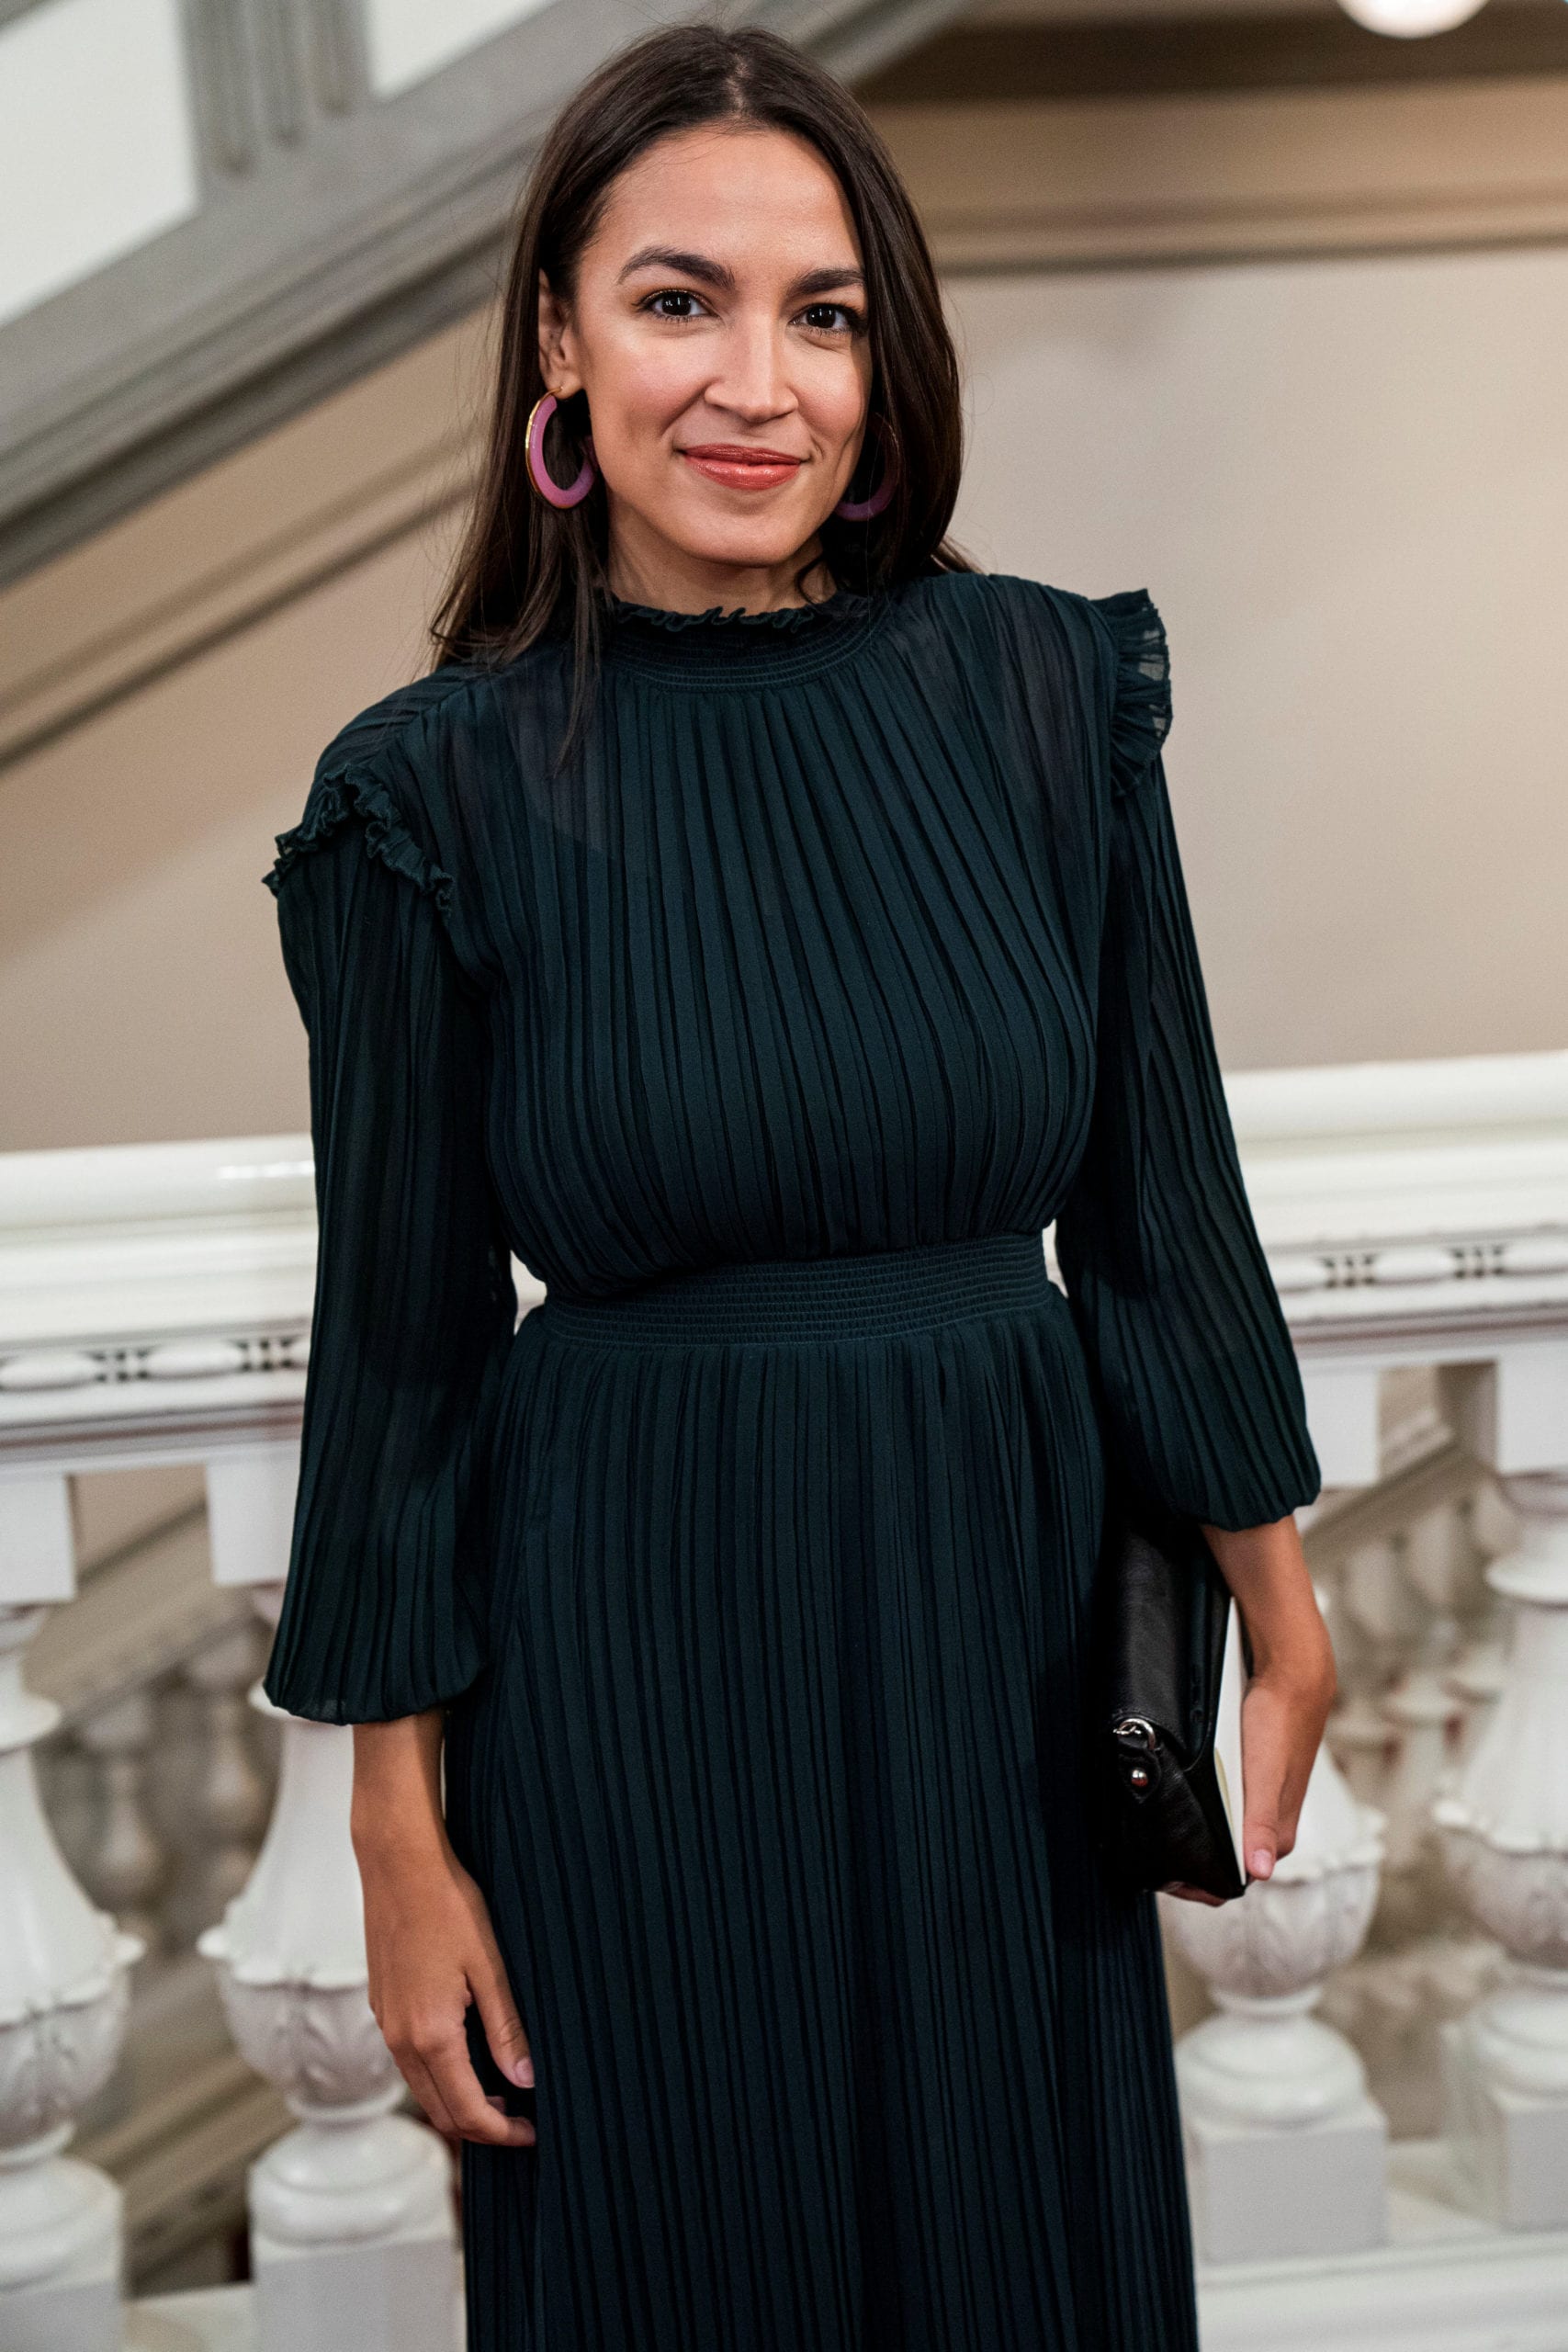 U.S. Rep. Alexandria Ocasio-Cortez (D-NY) arrives at Gala Dinner on the occasion of the World Mayors Summit in Christiansborg in Copenhagen, Denmark October 10, 2019.  Ritzau Scanpix/Martin Sylvest via REUTERS    ATTENTION EDITORS - THIS IMAGE WAS PROVIDED BY A THIRD PARTY. DENMARK OUT. NO COMMERCIAL OR EDITORIAL SALES IN DENMARK.